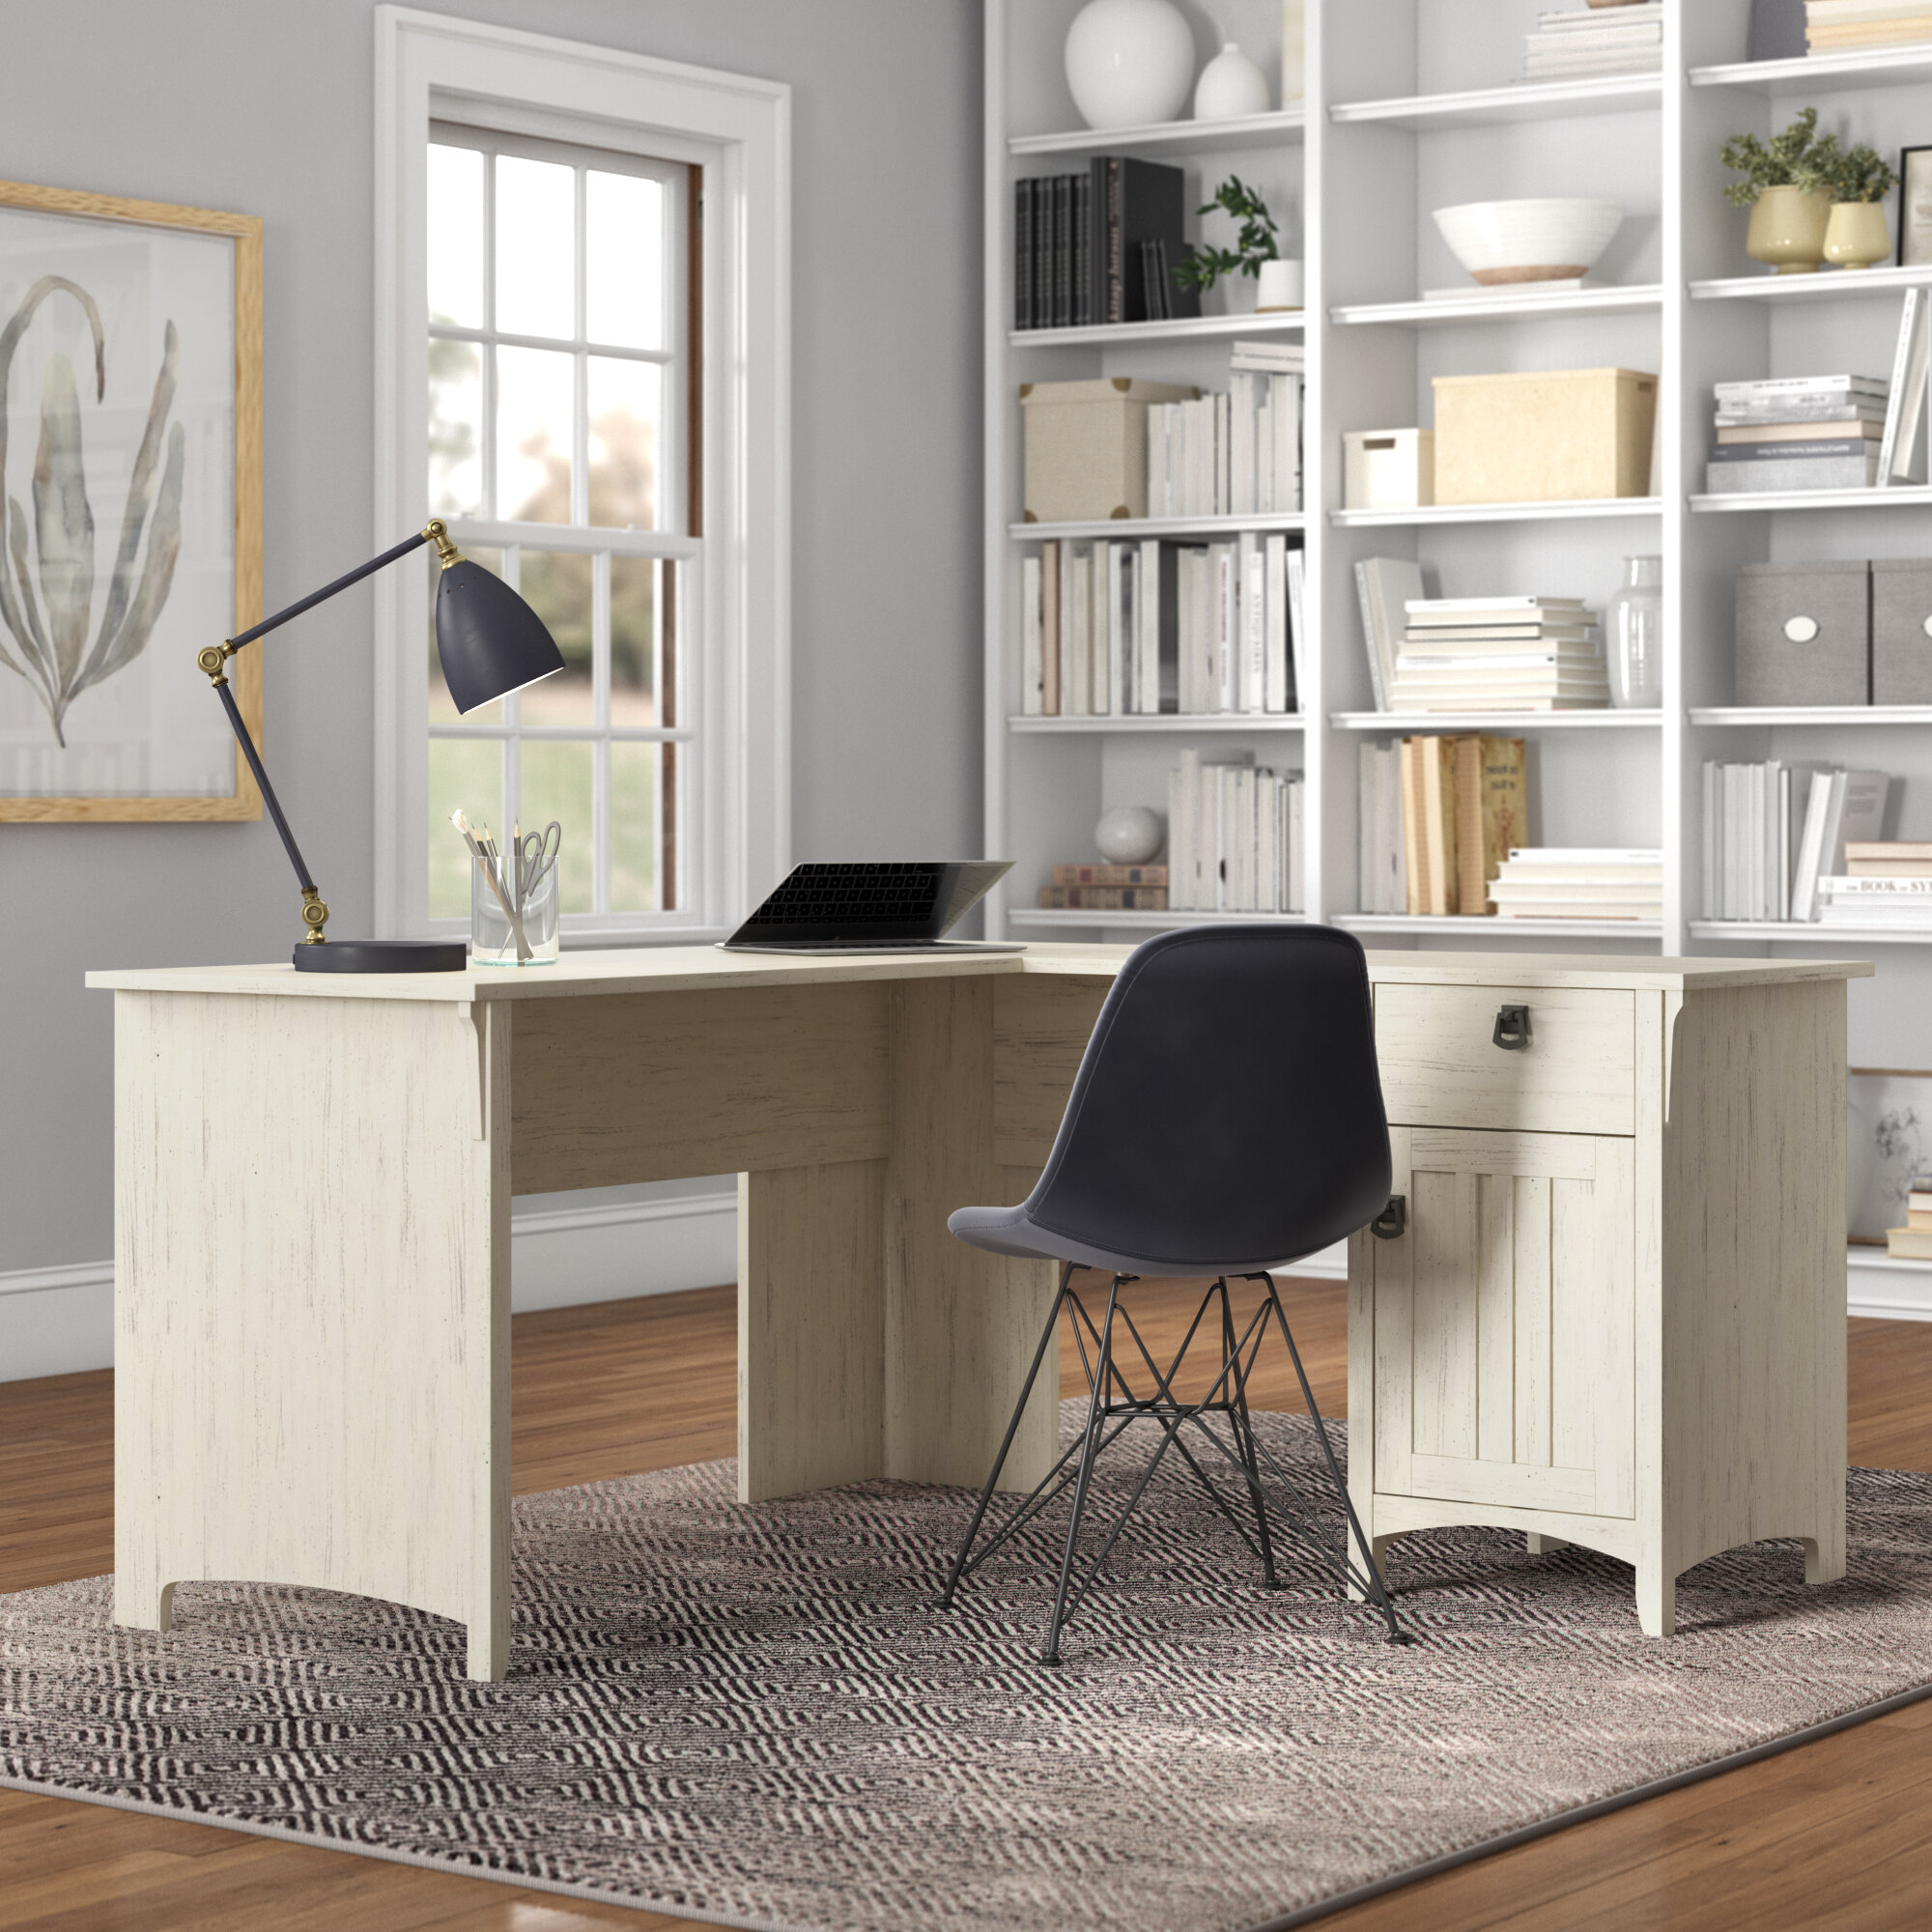 Koopman L-Shaped Home Office Computer Desk with Storage Cabinet, Farmhouse Office Table for Writing Study Steelside Color: Rustic Brown